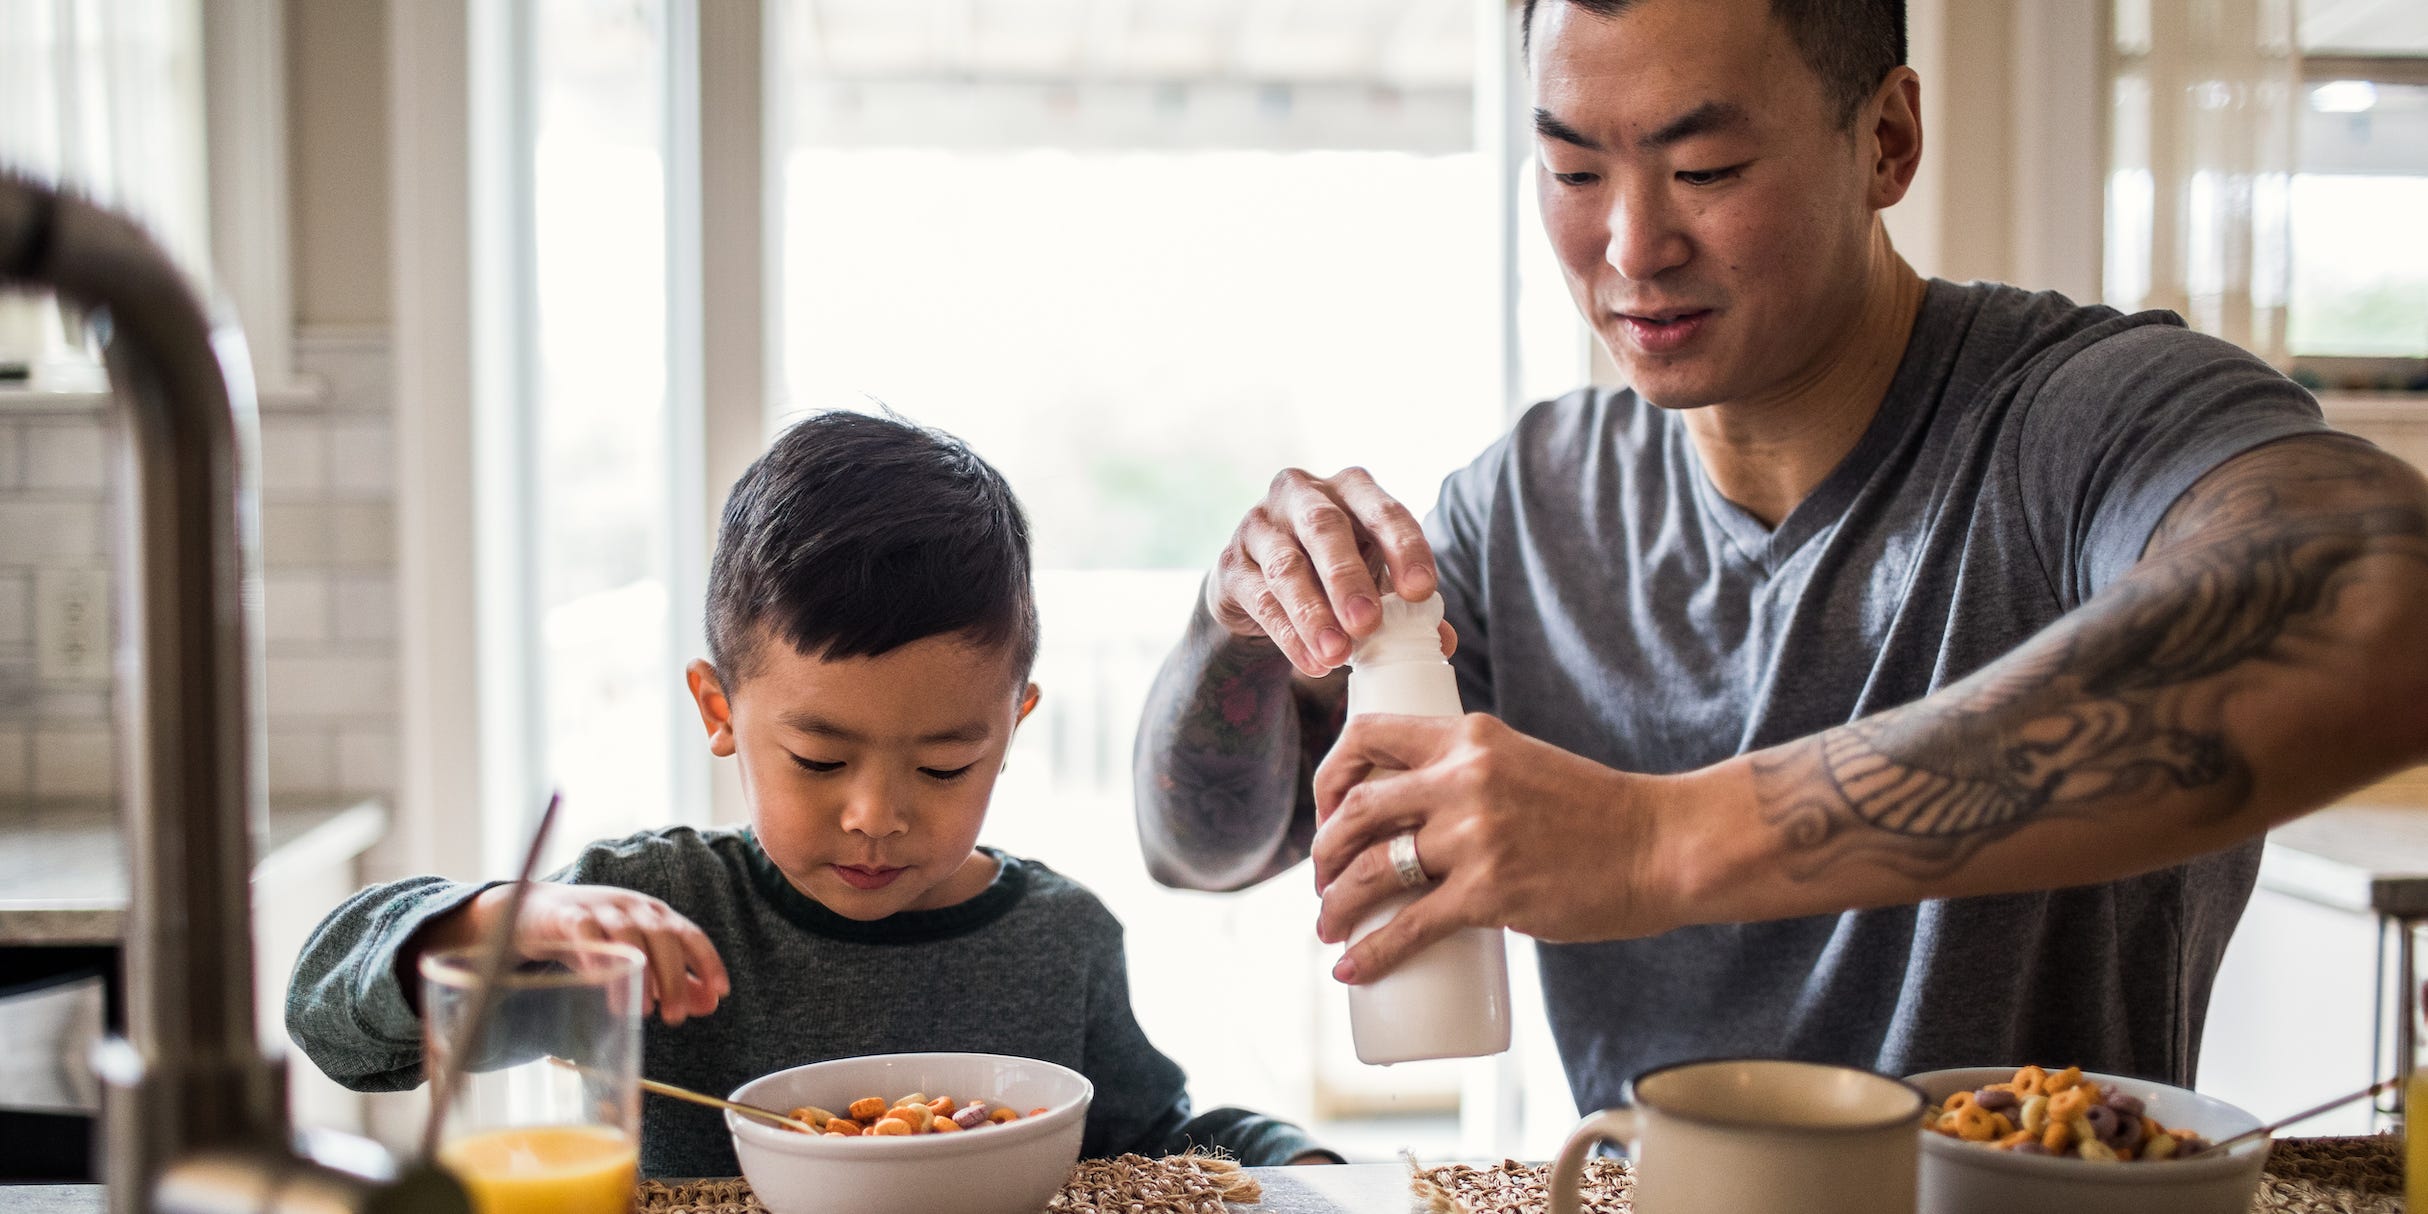 A father and son eat a calcium-rich breakfast.